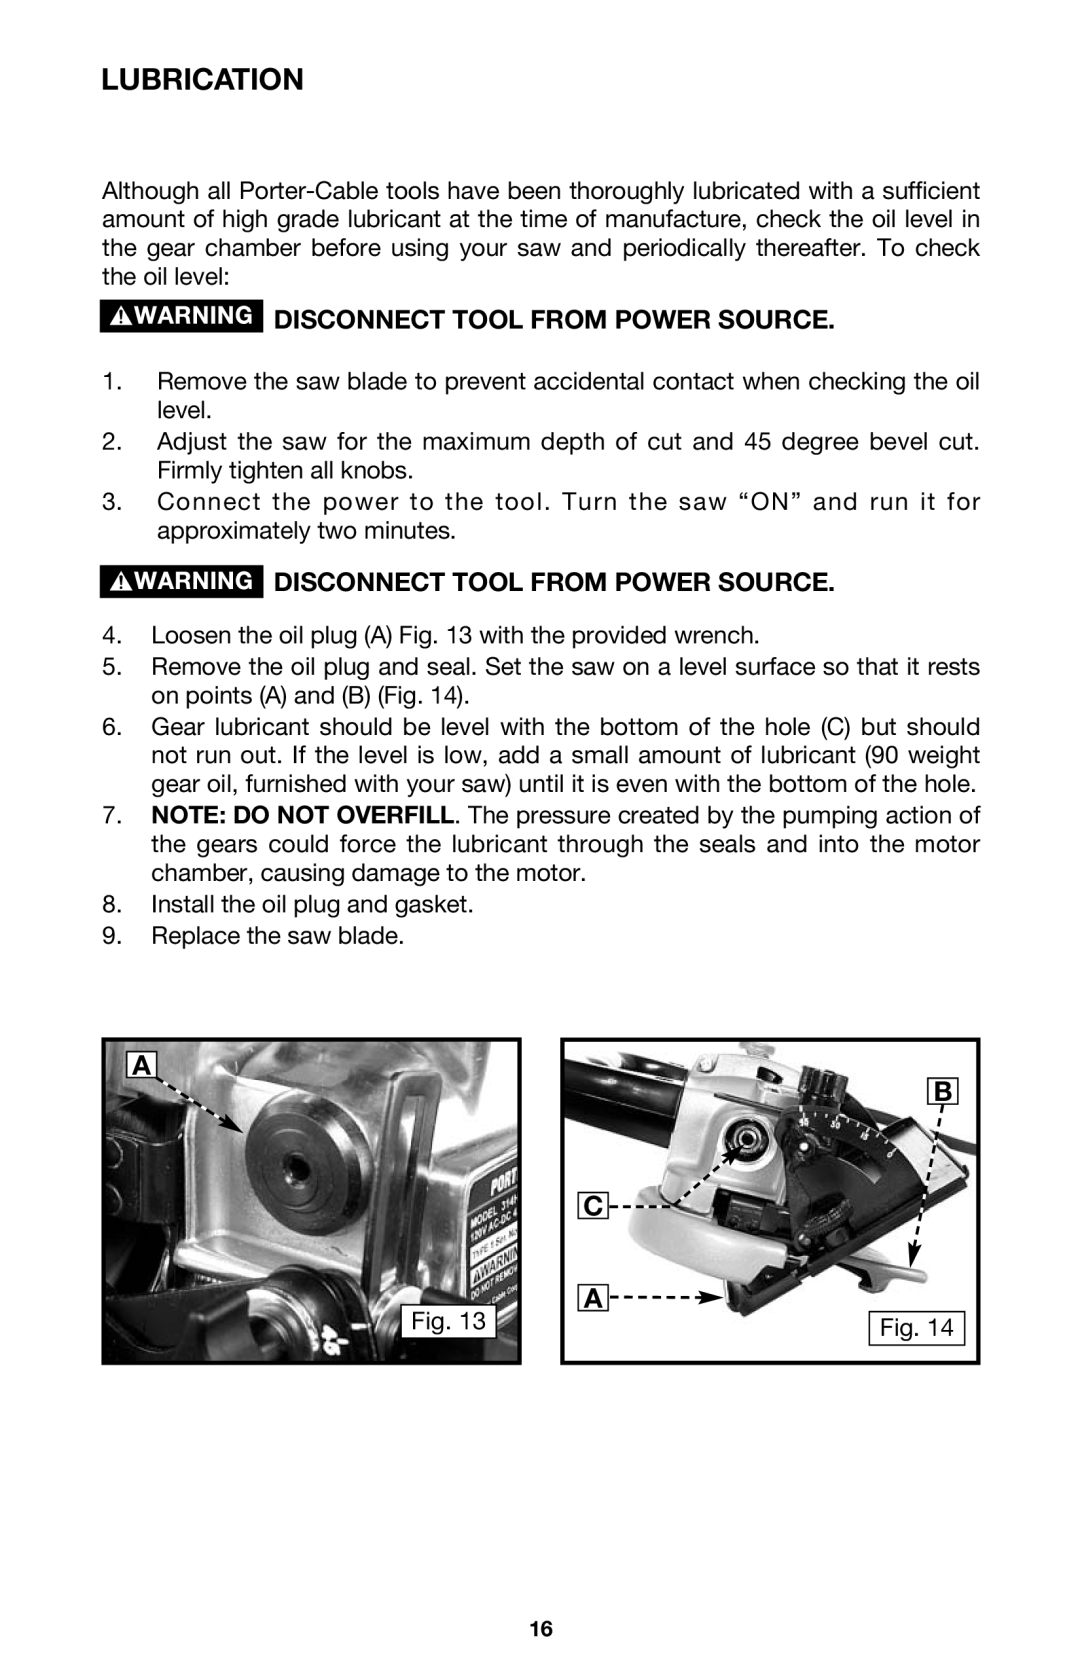 PYLE Audio 314 instruction manual Lubrication, Disconnect Tool From Power Source 